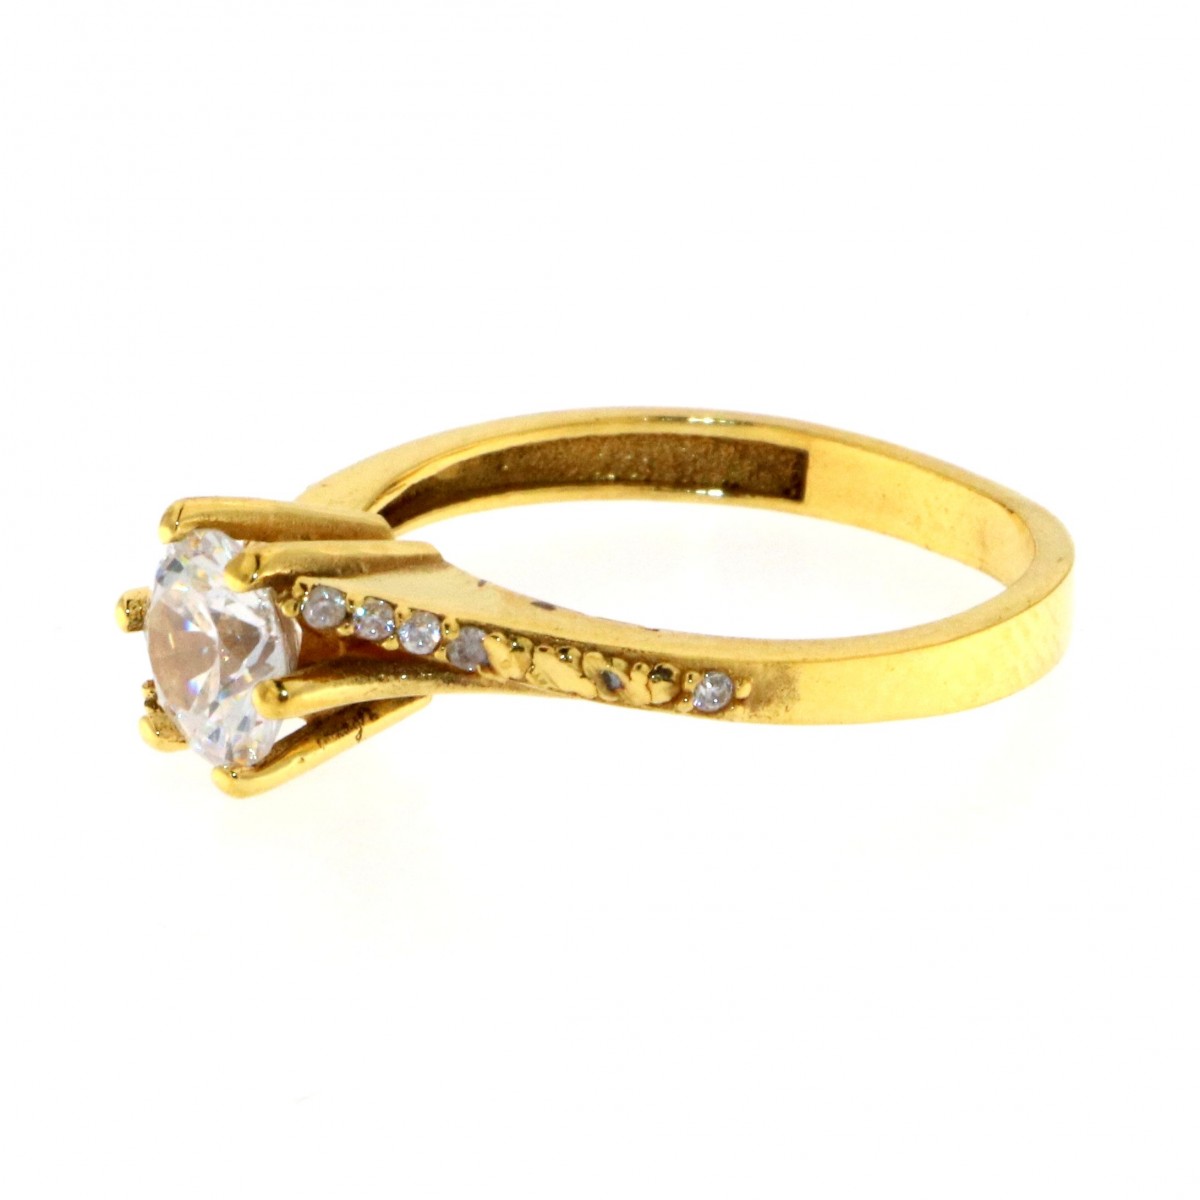 22ct Indian/Asian Gold Ring | Rings | Indian Jewellery | Gold Jewellery ...